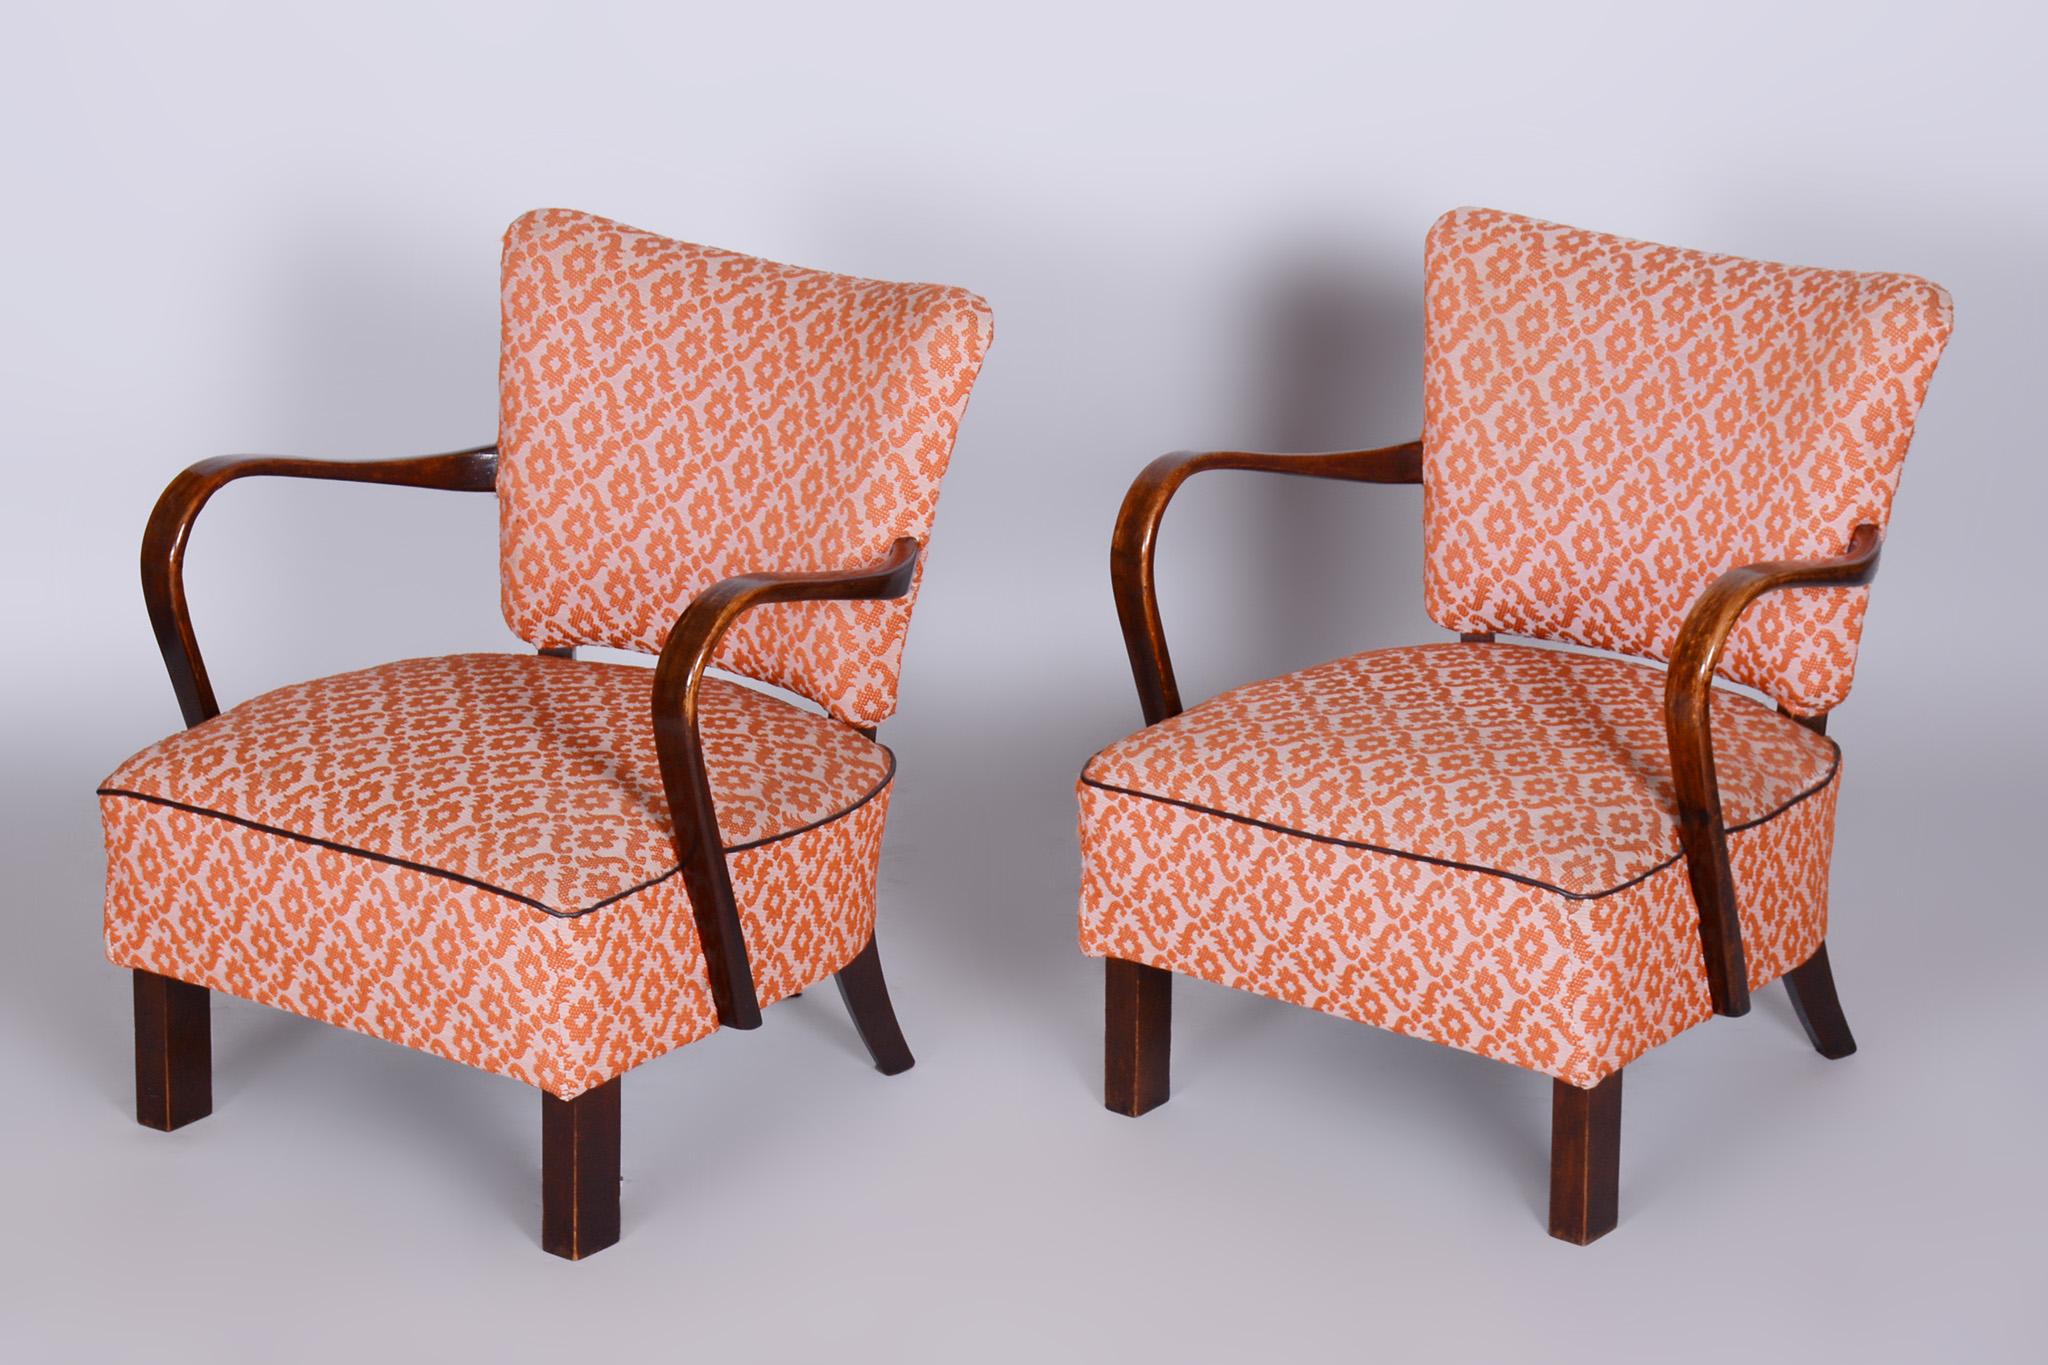 Pair of Beech Art Deco Armchairs Made in 1930s, Czechia, Revived Polish For Sale 4